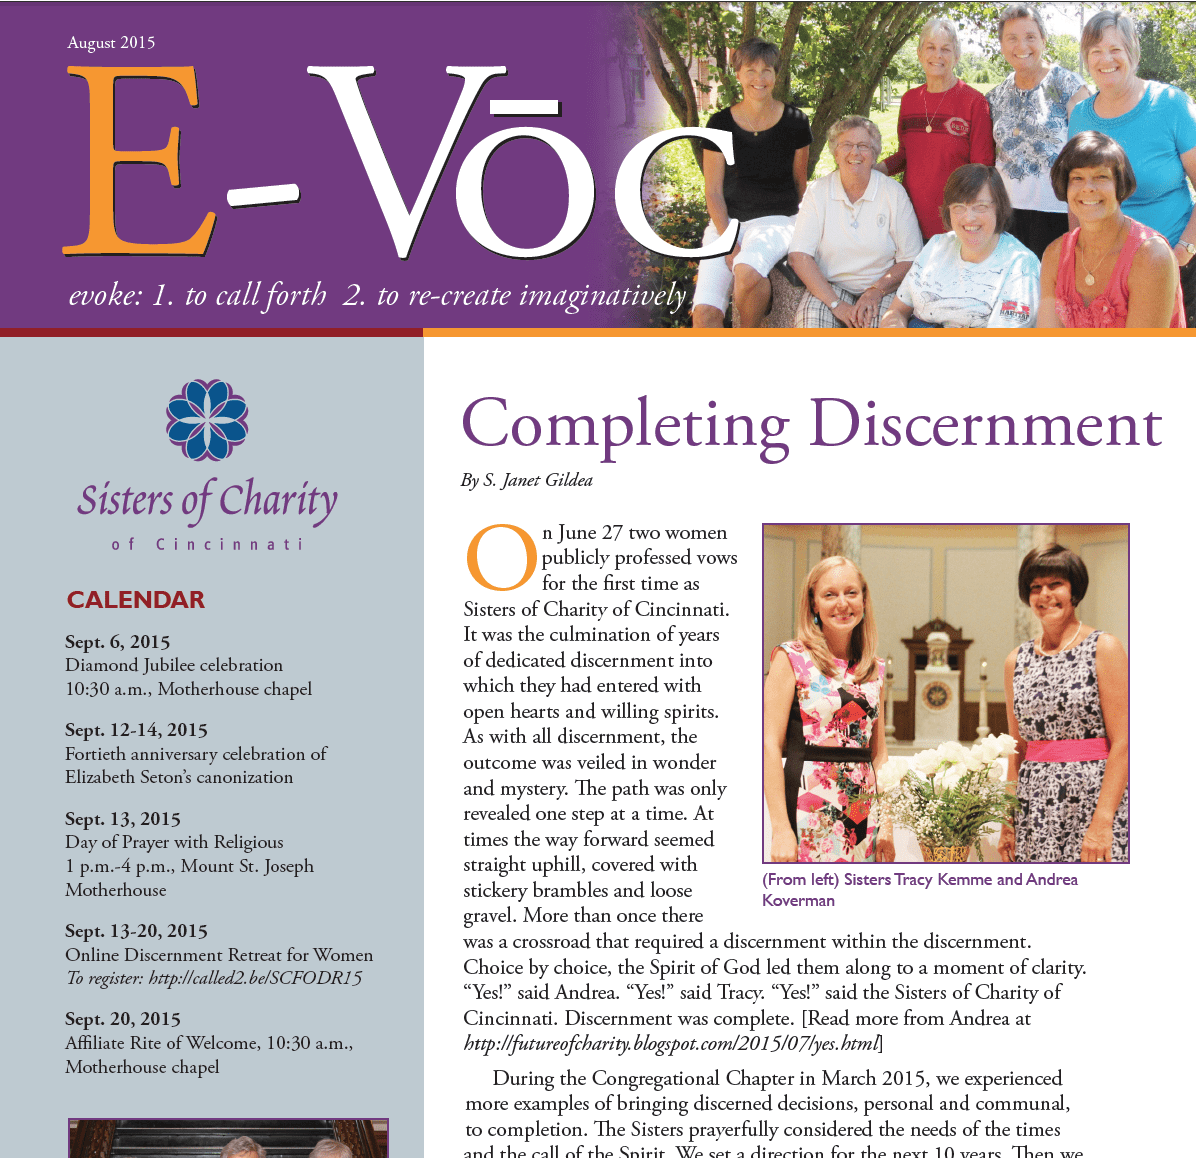 Completing Discernment